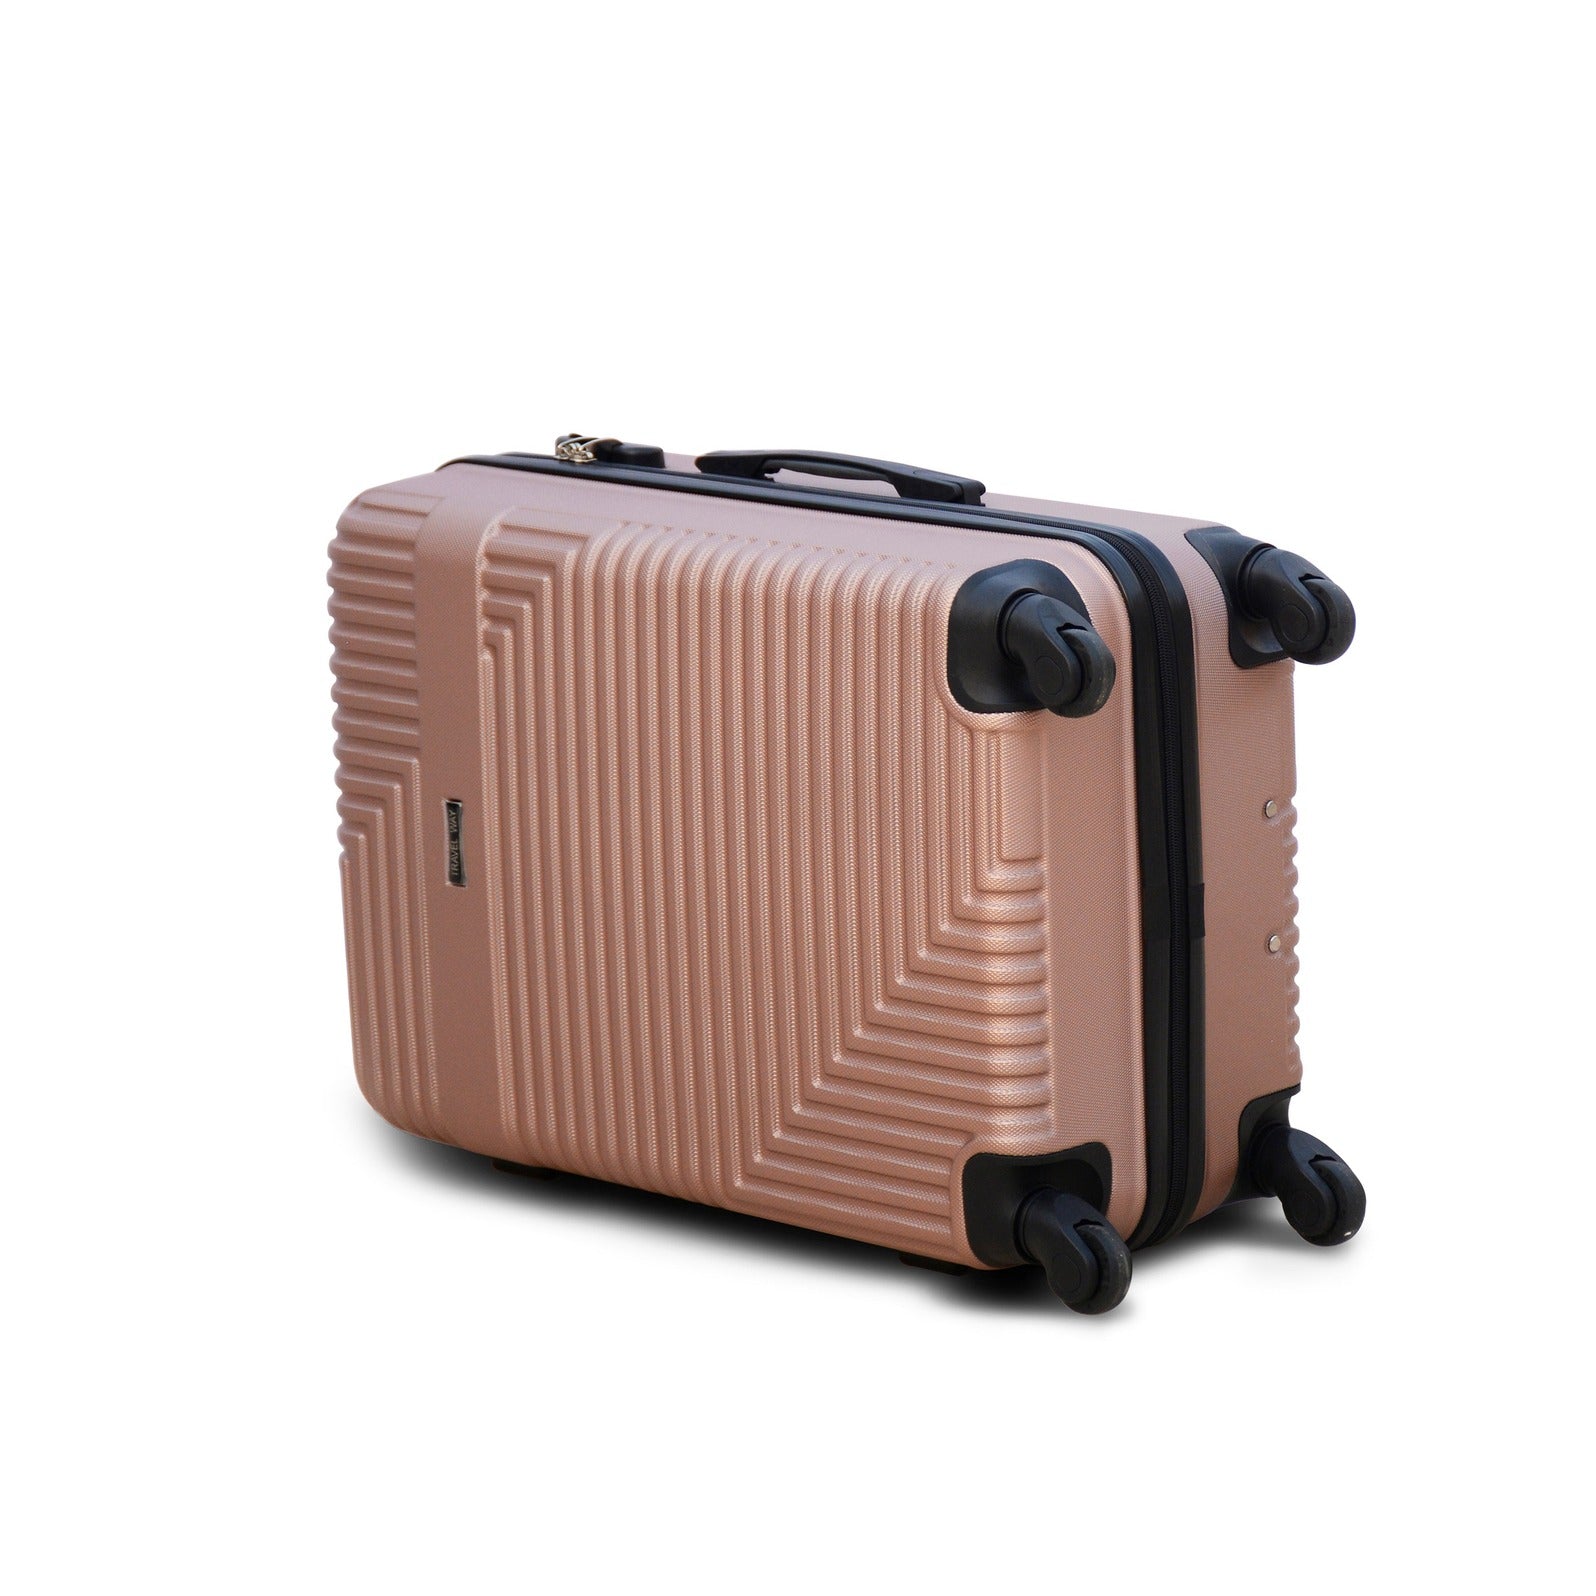 28" Rose Gold Travel Way ABS Lightweight Luggage Bag With Spinner Wheel